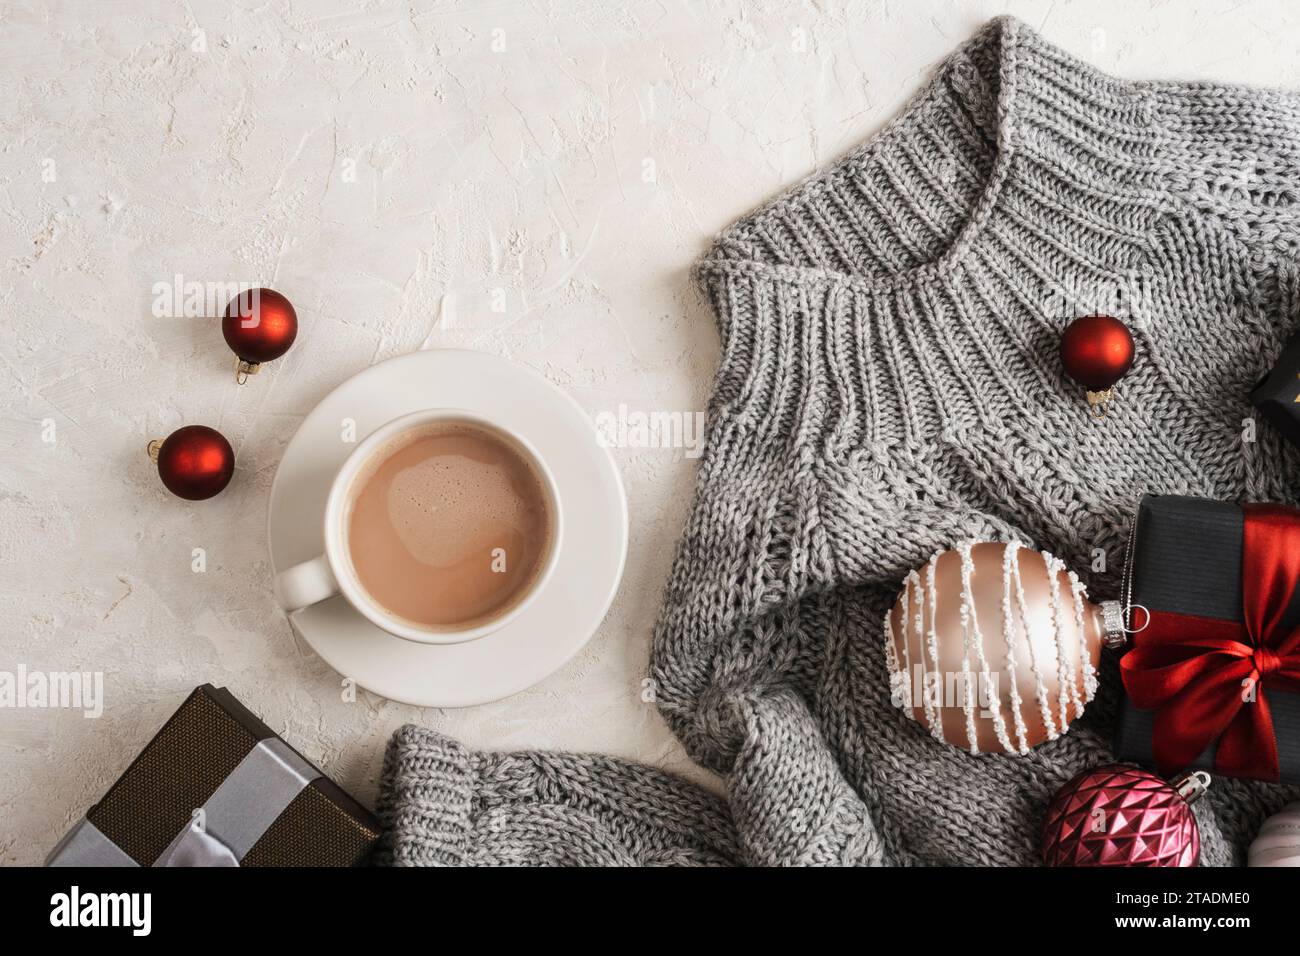 A cup of coffee and Christmas gifts on grey sweater on white background. Top view, flat lay. Stock Photo